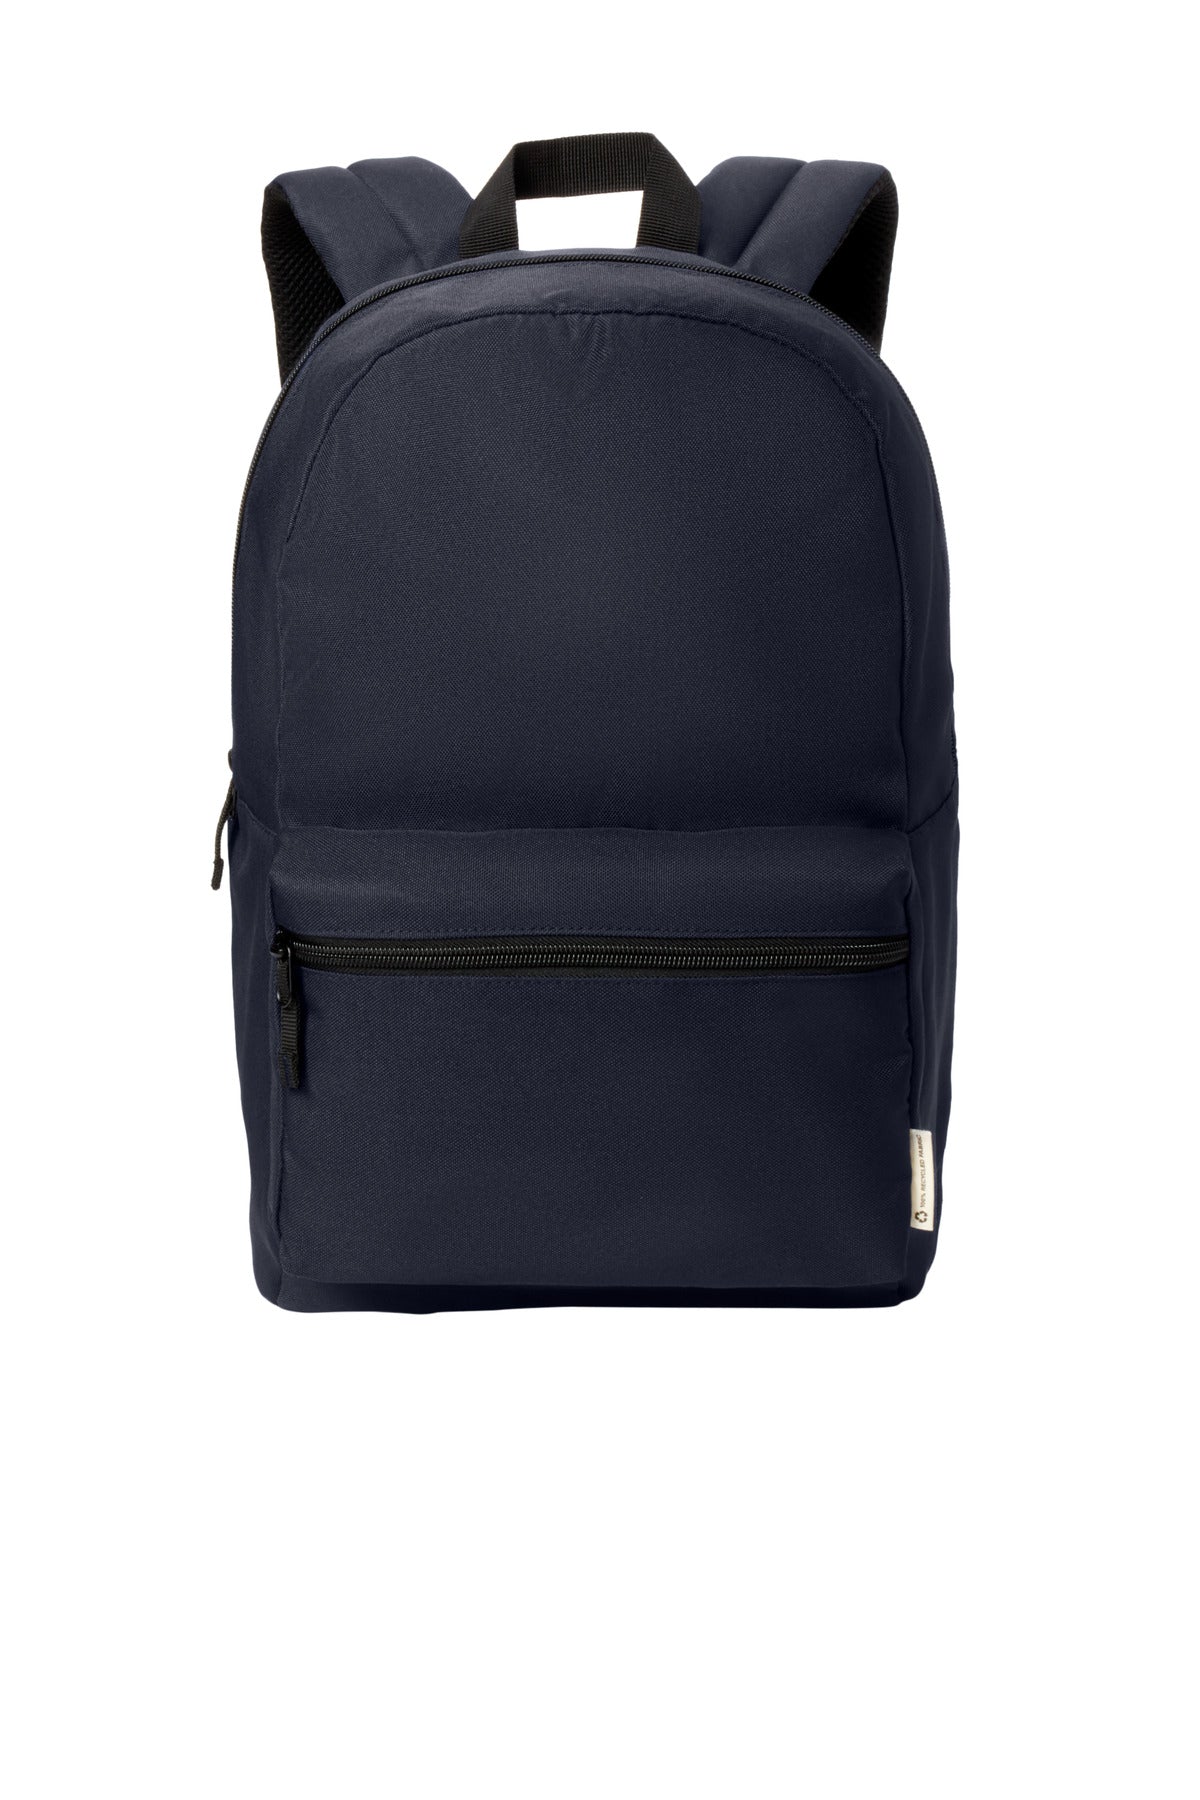 Port Authority® C-FREE™ Recycled Backpack BG270